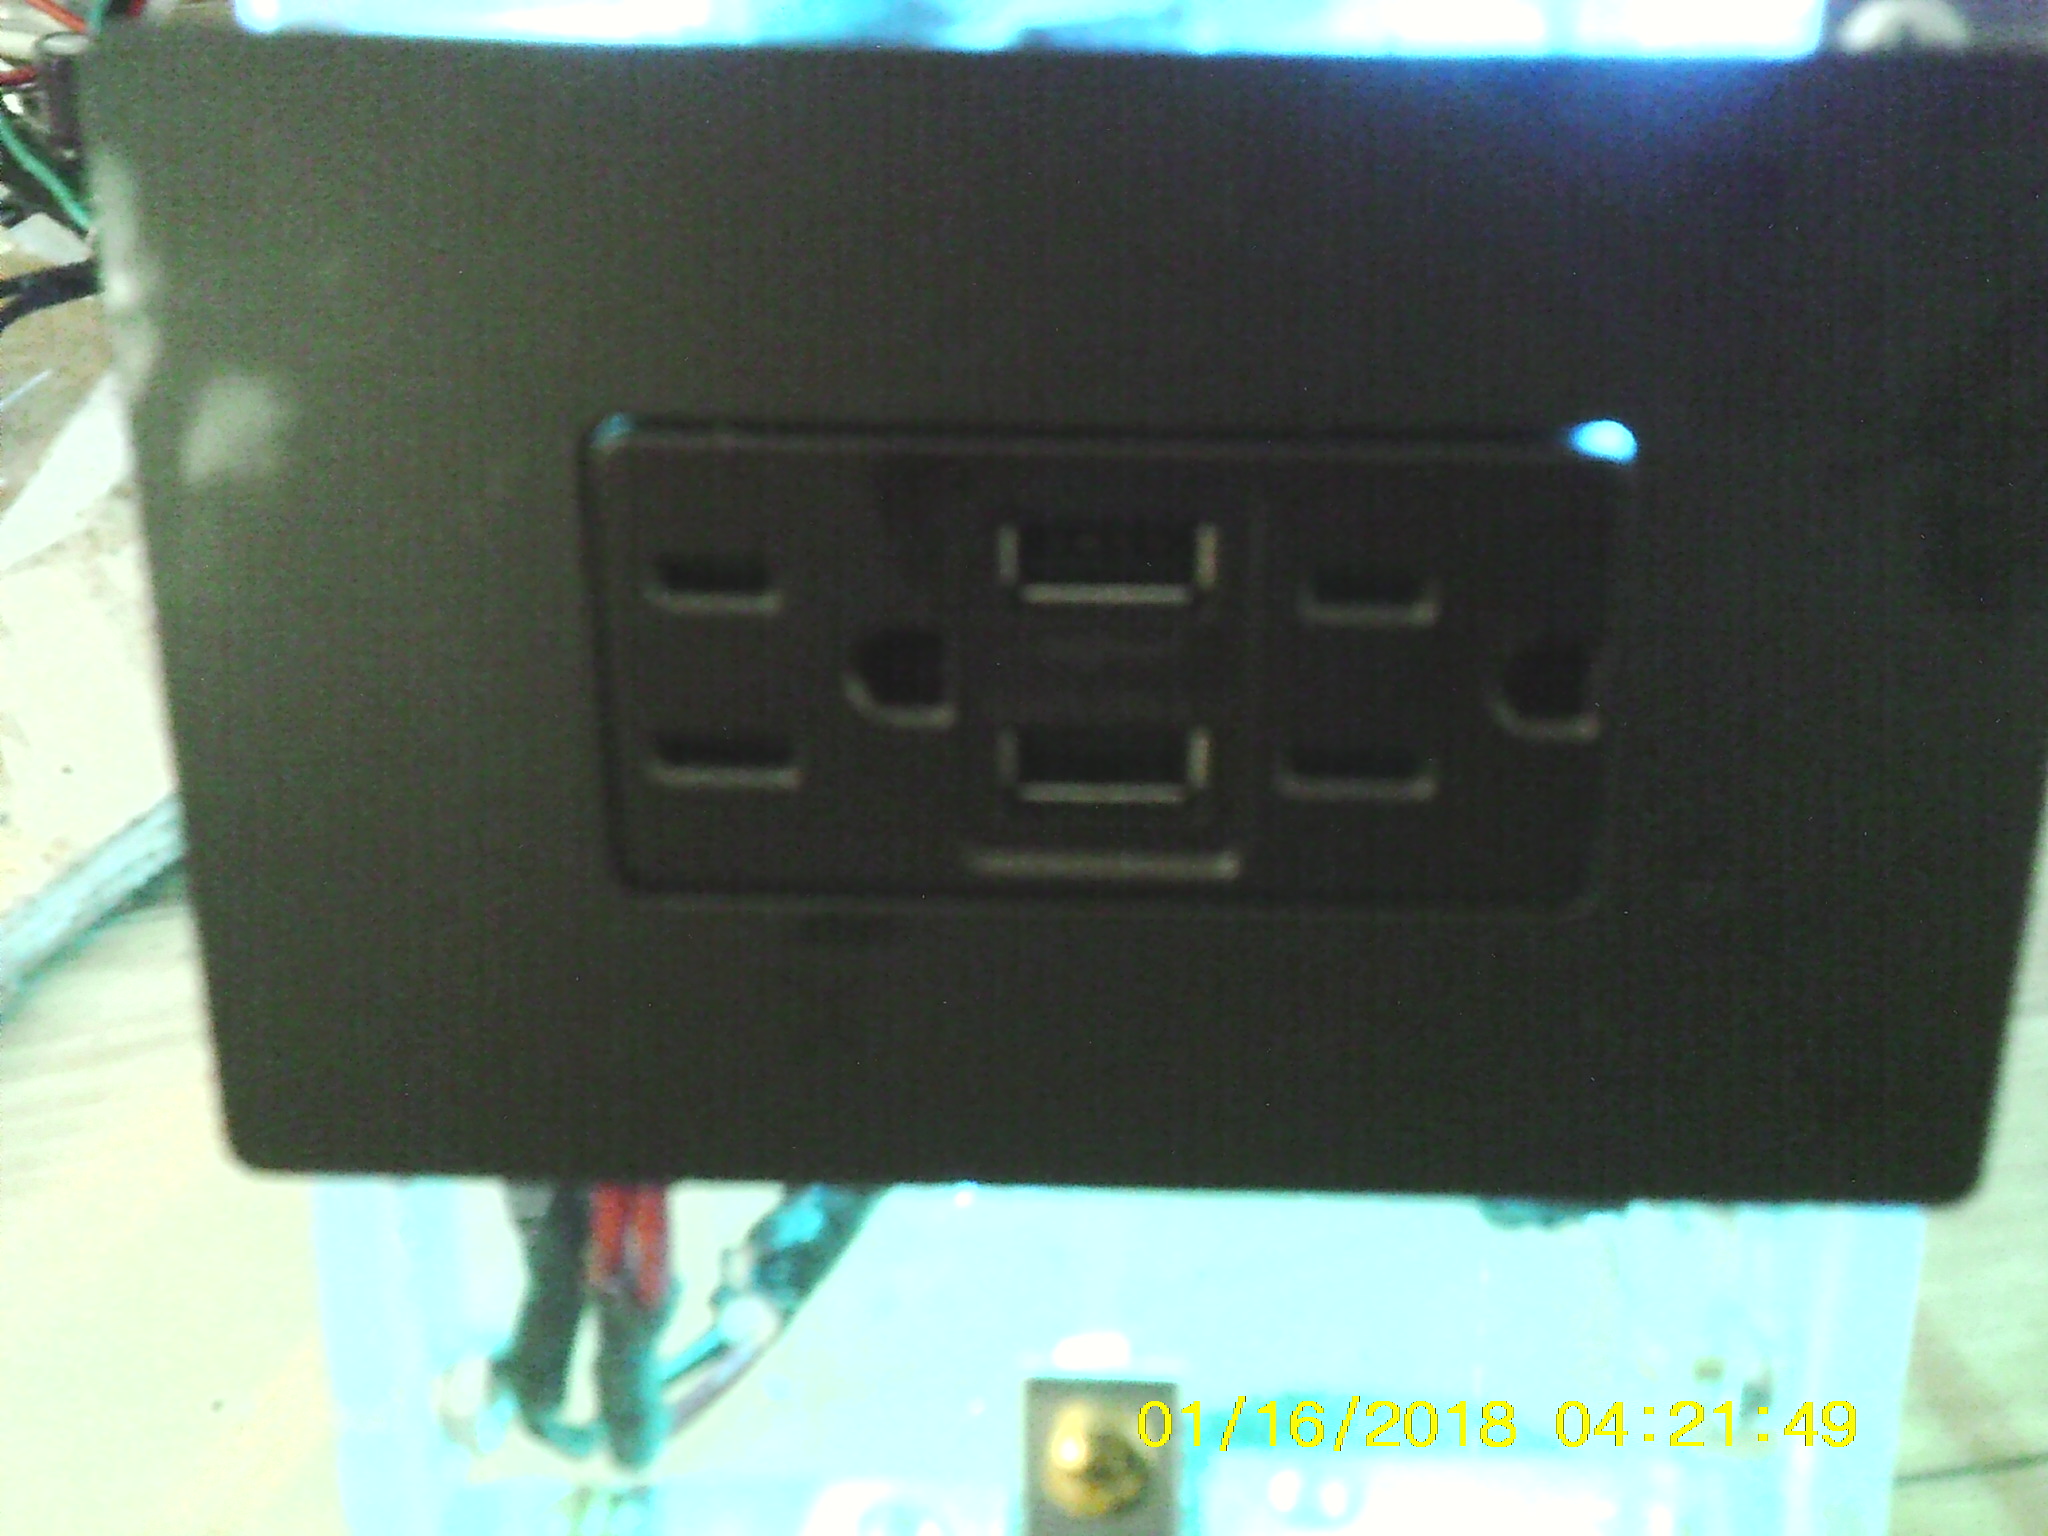 110 volt plug with usb charge ports good pic.